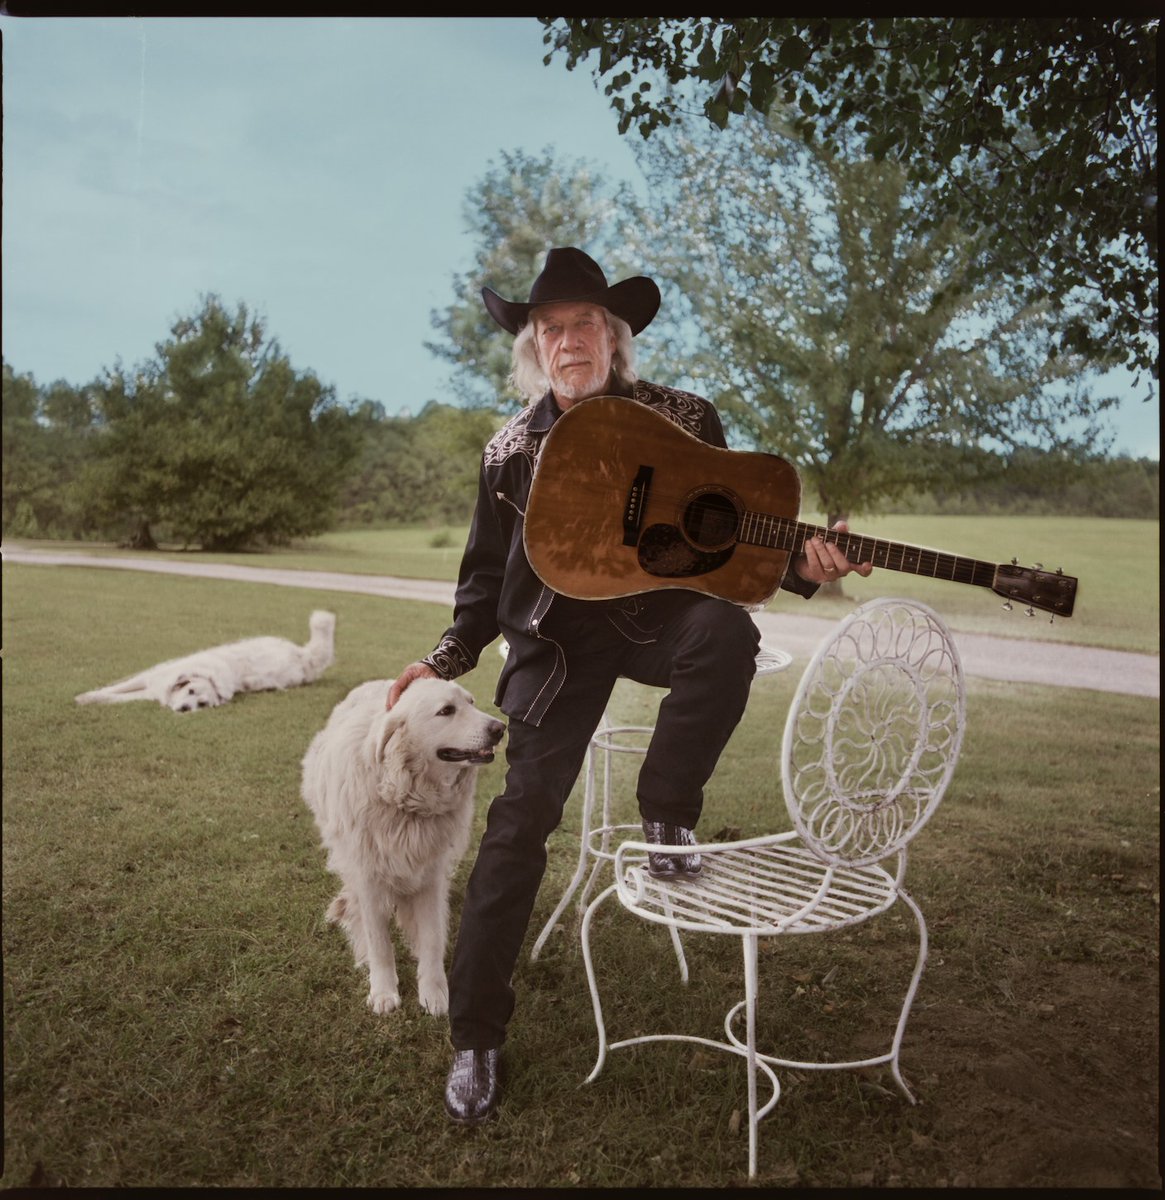 “When it’s all said and done, you feel pleased when people are affected by any song or music that you wrote. That’s a pretty big deal. That’s a big part of what music is all about.” – @johnanderson Revisit the timeless album produced by @danauerbach here: geni.us/JohnAndersonYe…